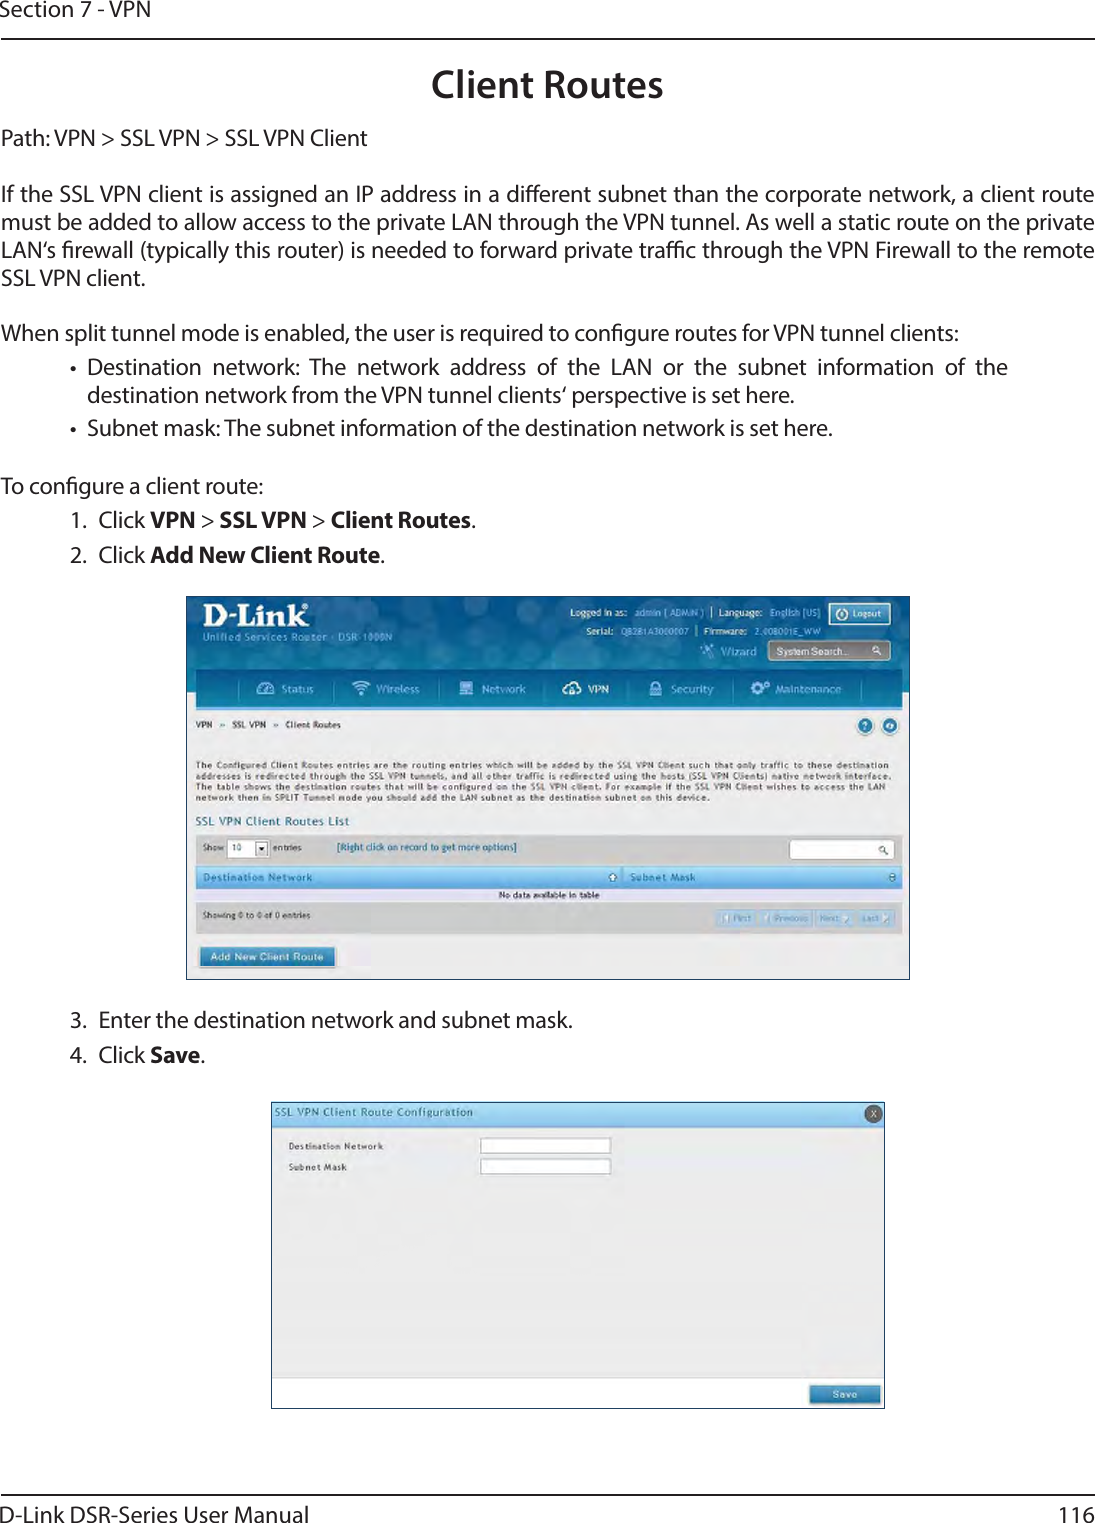 D-Link DSR-Series User Manual 116Section 7 - VPNClient RoutesPath: VPN &gt; SSL VPN &gt; SSL VPN ClientIf the SSL VPN client is assigned an IP address in a dierent subnet than the corporate network, a client route must be added to allow access to the private LAN through the VPN tunnel. As well a static route on the private LAN‘s rewall (typically this router) is needed to forward private trac through the VPN Firewall to the remote SSL VPN client.When split tunnel mode is enabled, the user is required to congure routes for VPN tunnel clients:• Destination network: The network address of the LAN or the subnet information of the destination network from the VPN tunnel clients‘ perspective is set here.•  Subnet mask: The subnet information of the destination network is set here.To congure a client route:1. Click VPN &gt; SSL VPN &gt; Client Routes.2. Click Add New Client Route.3.  Enter the destination network and subnet mask.4. Click Save.